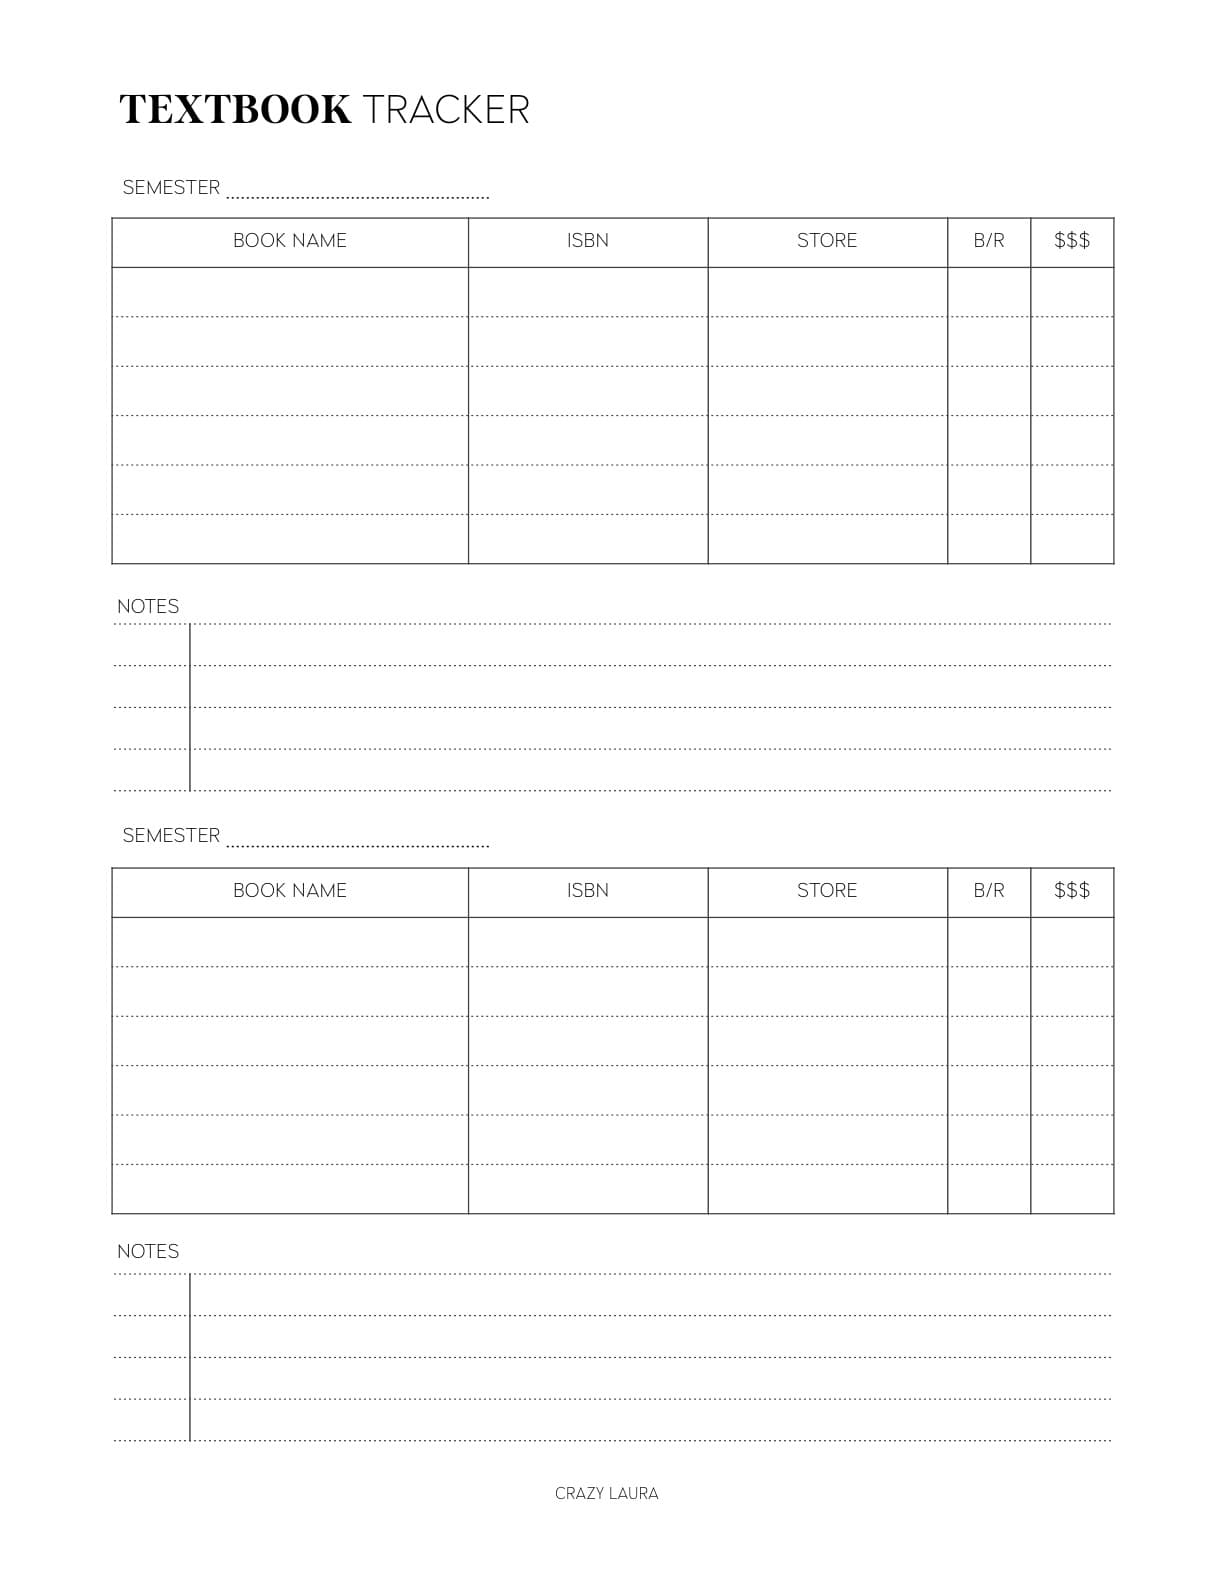 simple student textbook tracker